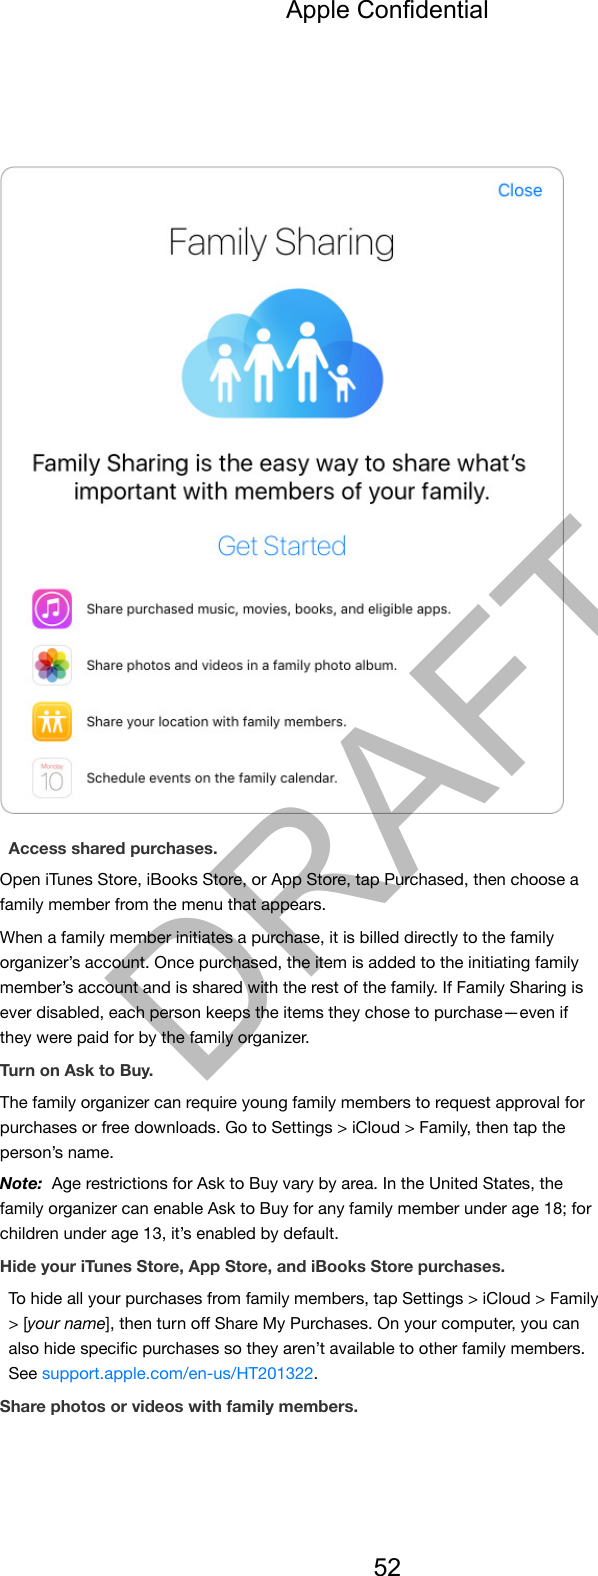 Access shared purchases.Open iTunes Store, iBooks Store, or App Store, tap Purchased, then choose afamily member from the menu that appears.When a family member initiates a purchase, it is billed directly to the familyorganizer’s account. Once purchased, the item is added to the initiating familymember’s account and is shared with the rest of the family. If Family Sharing isever disabled, each person keeps the items they chose to purchase—even ifthey were paid for by the family organizer.Turn on Ask to Buy.The family organizer can require young family members to request approval forpurchases or free downloads. Go to Settings &gt; iCloud &gt; Family, then tap theperson’s name.Note:  Age restrictions for Ask to Buy vary by area. In the United States, thefamily organizer can enable Ask to Buy for any family member under age 18; forchildren under age 13, it’s enabled by default.Hide your iTunes Store, App Store, and iBooks Store purchases.To hide all your purchases from family members, tap Settings &gt; iCloud &gt; Family&gt; [your name], then turn oﬀ Share My Purchases. On your computer, you canalso hide speciﬁc purchases so they aren’t available to other family members.See support.apple.com/en-us/HT201322.Share photos or videos with family members.Apple Confidential52DRAFT